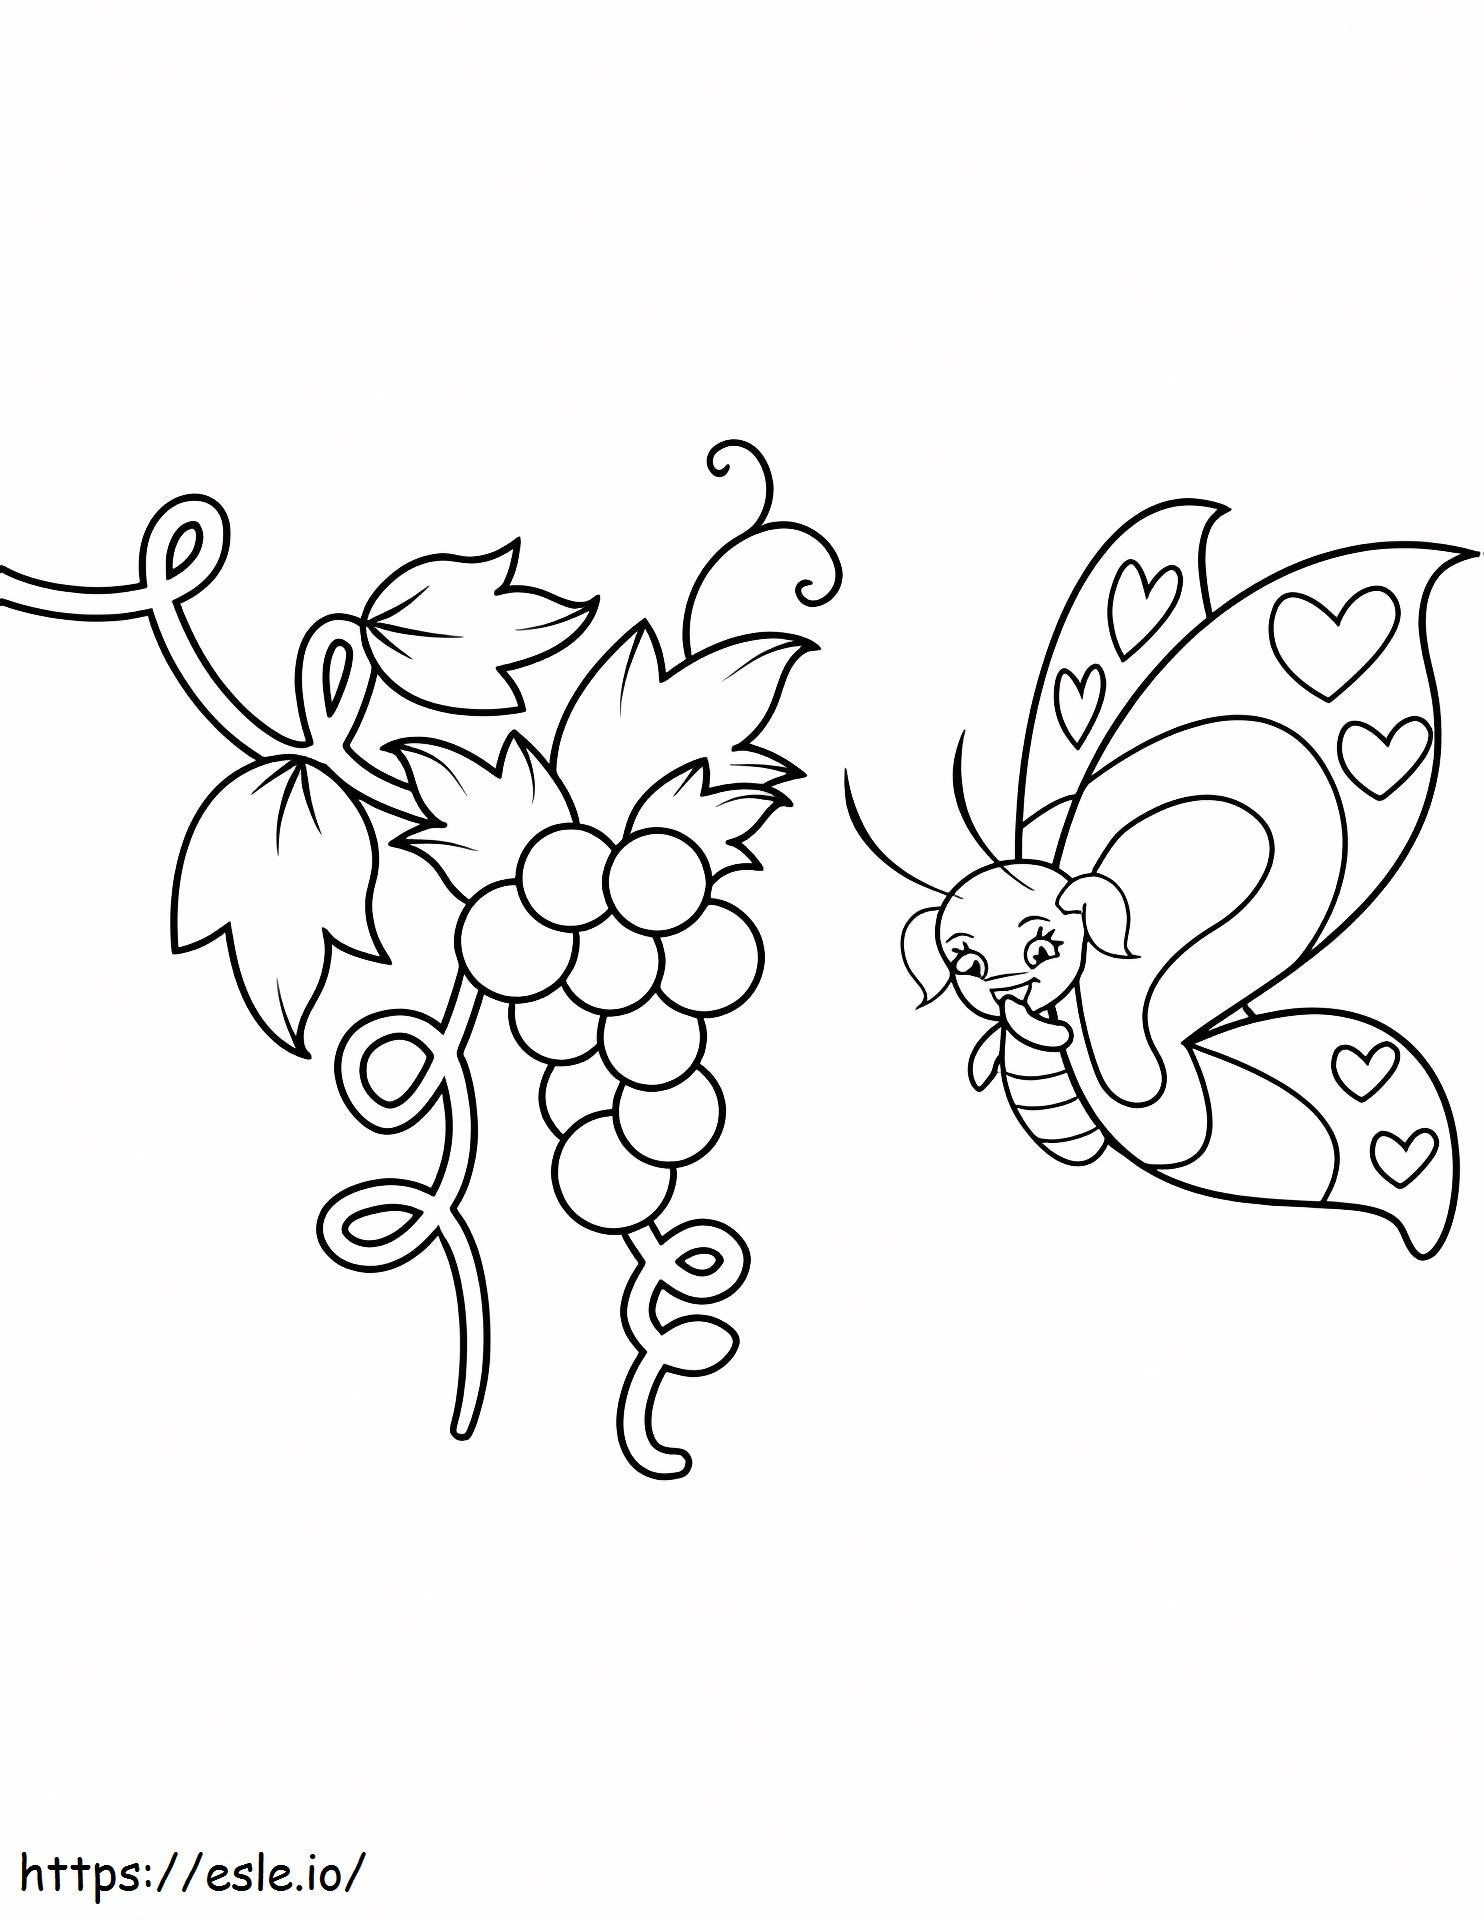 Butterfly And Grapes A4 coloring page